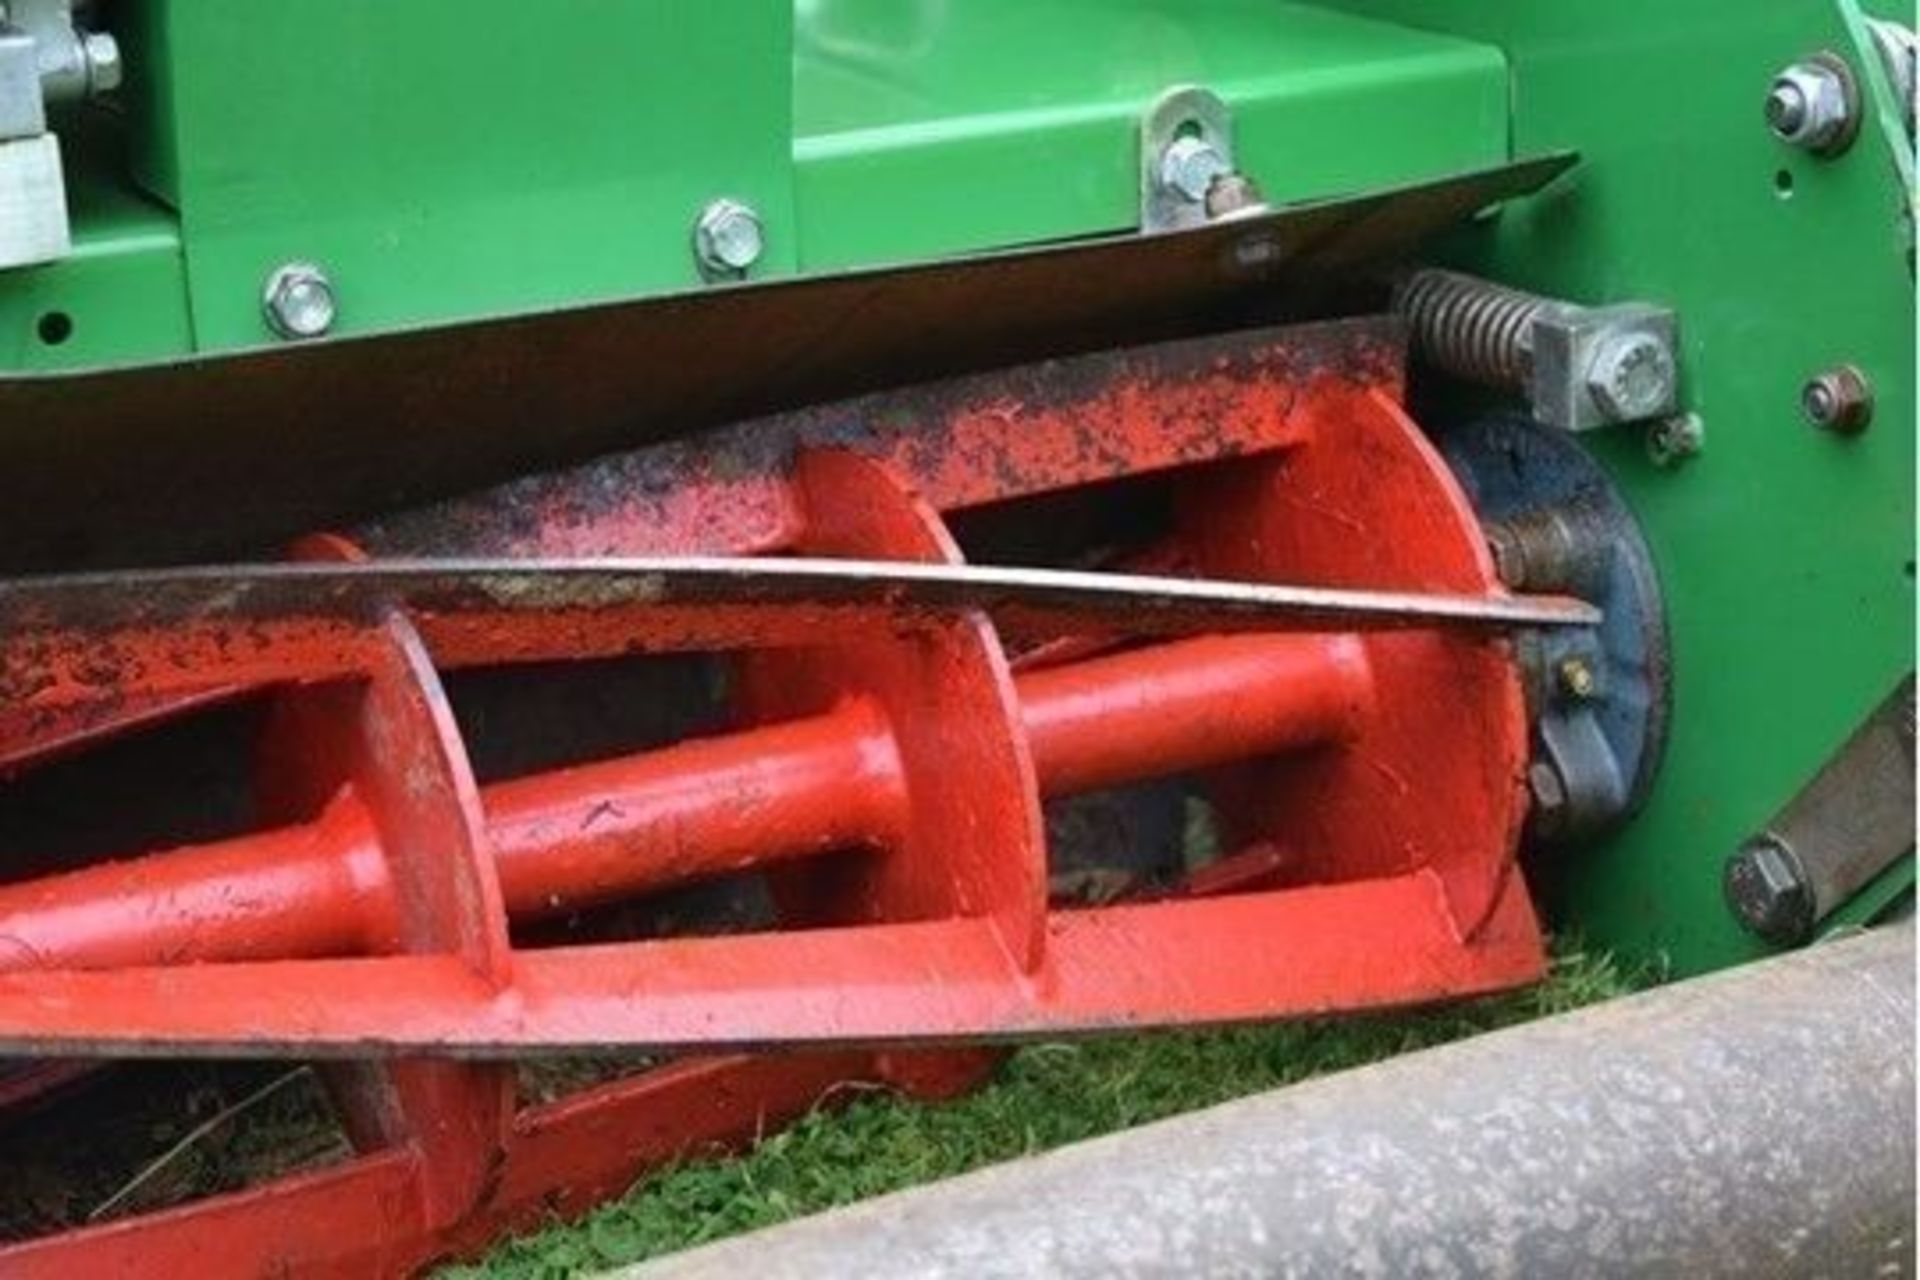 2004 Dennis G560 5 Blade Cylinder Mower With Grass Box - Image 8 of 11